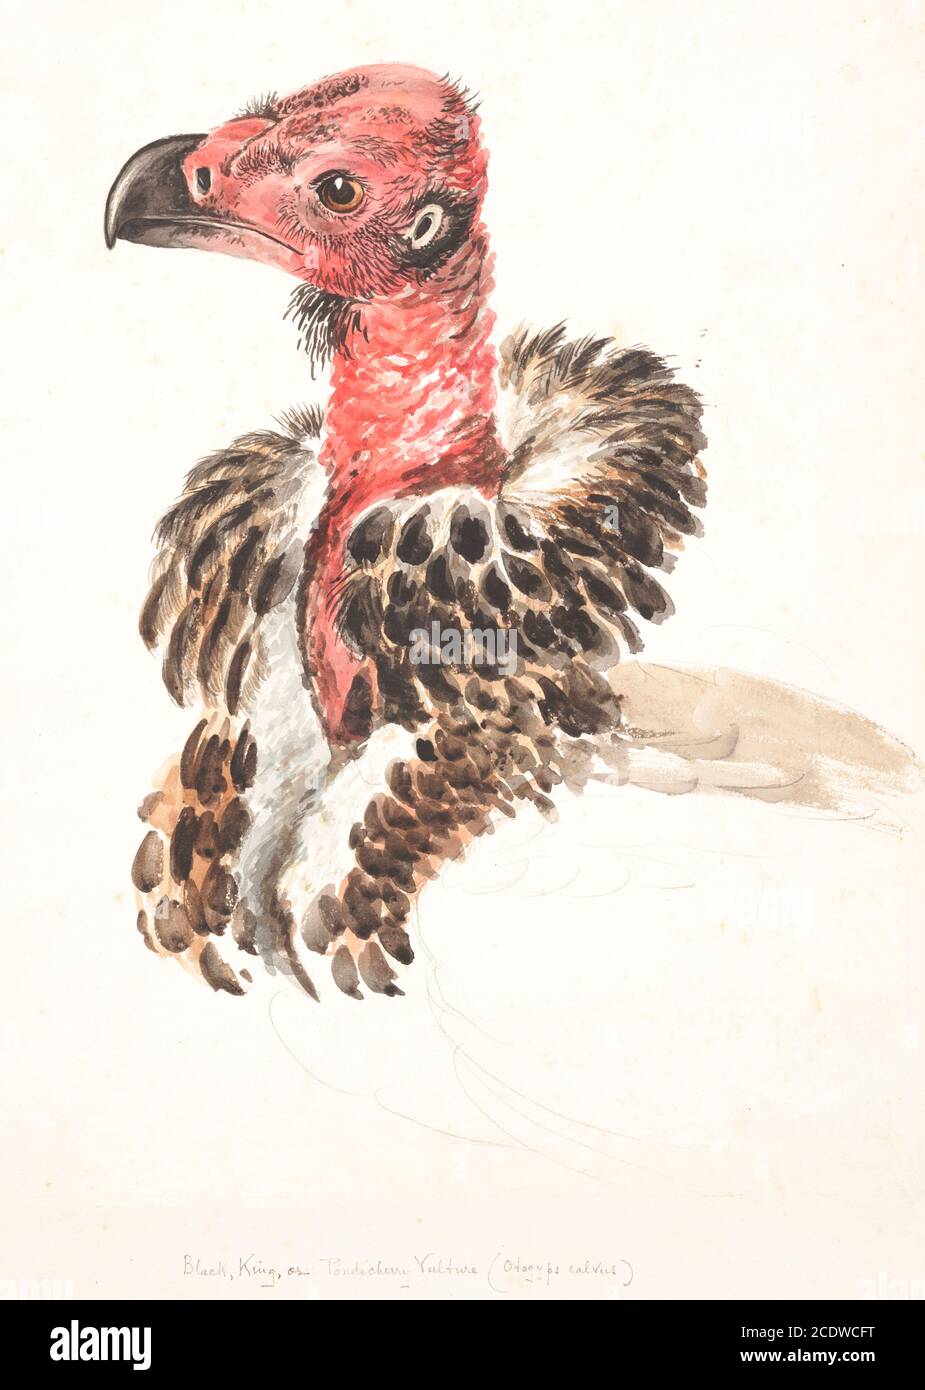 Portrait of the red-headed vulture (Sarcogyps calvus), also known as the Asian king vulture, Indian black vulture or Pondicherry vulture, is an Old World vulture mainly found in the Indian subcontinent, with small disjunct populations in some parts of Southeast Asia. 18th century watercolor painting by Elizabeth Gwillim. Lady Elizabeth Symonds Gwillim (21 April 1763 – 21 December 1807) was an artist married to Sir Henry Gwillim, Puisne Judge at the Madras high court until 1808. Lady Gwillim painted a series of about 200 watercolours of Indian birds. Produced about 20 years before John James Au Stock Photo